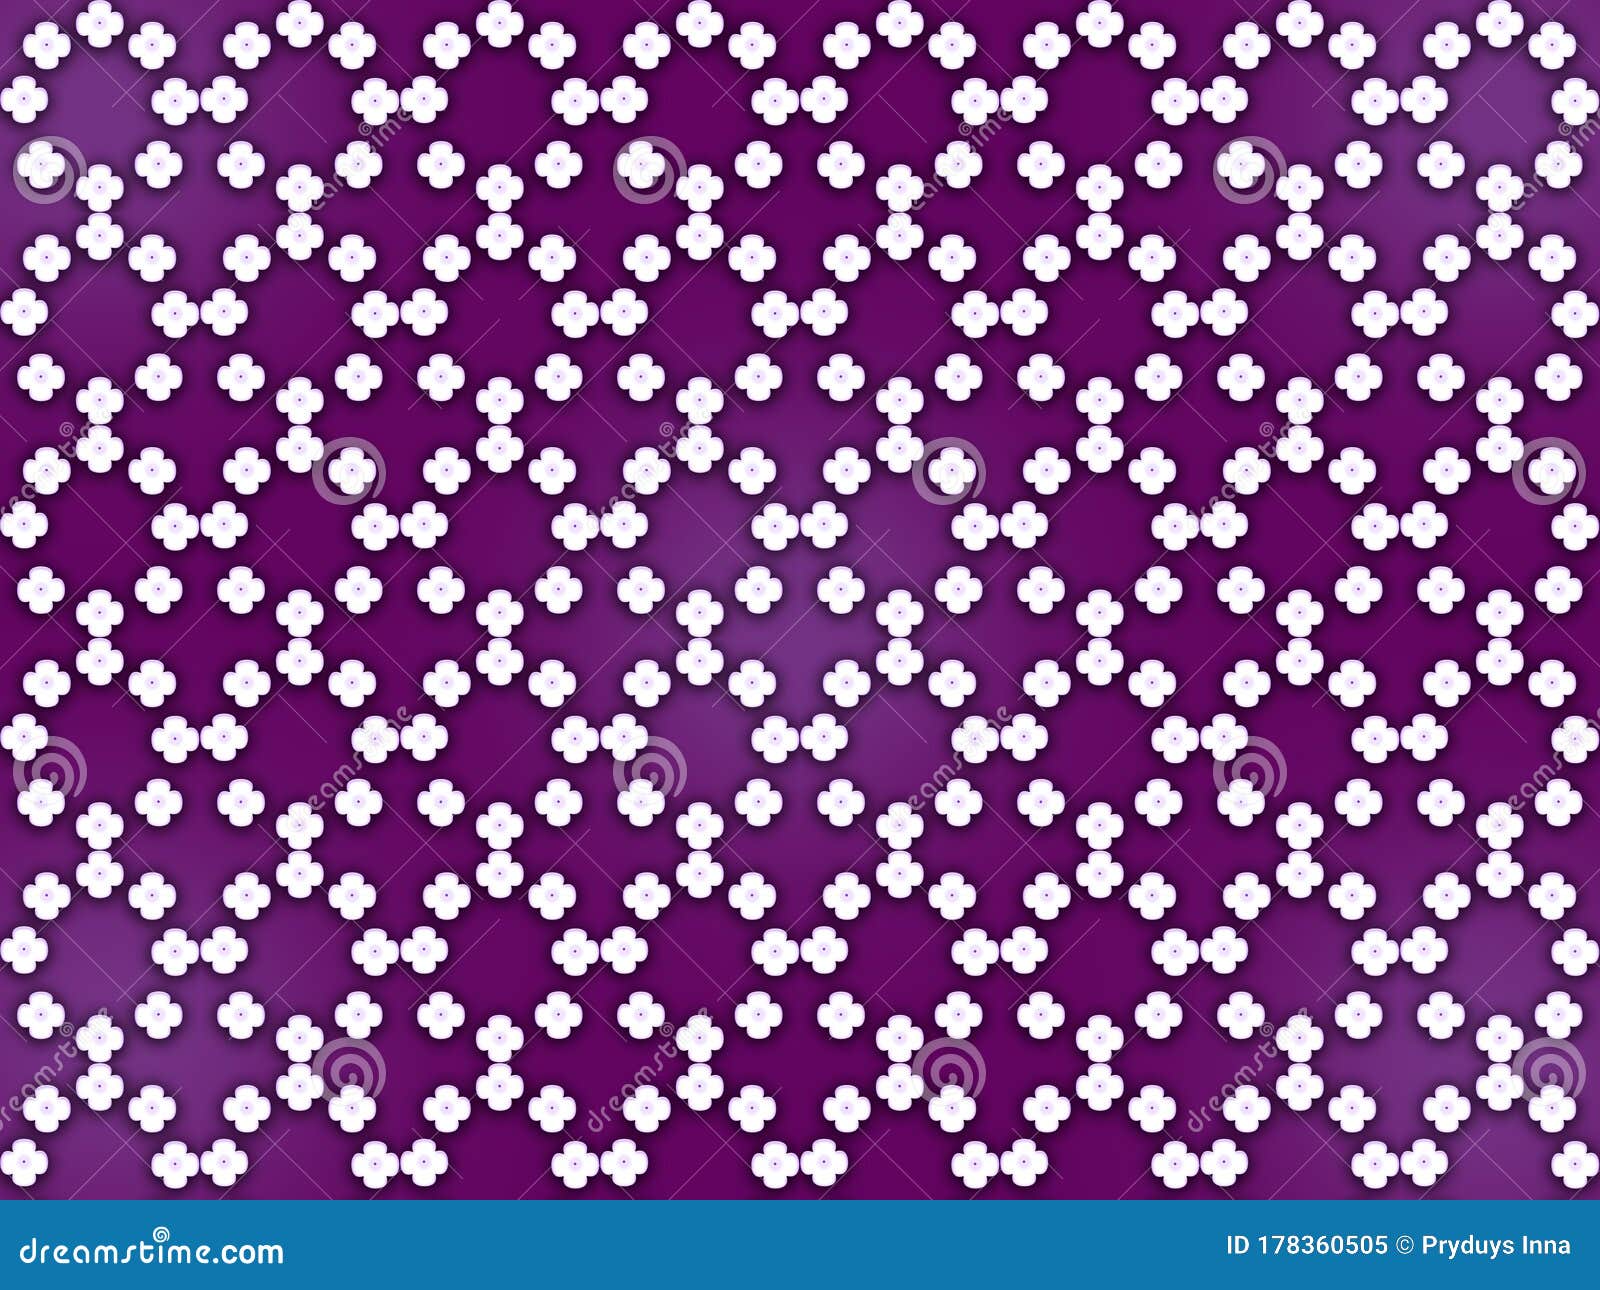 simple texture of flowers. ornament of white flowers on a purple background.